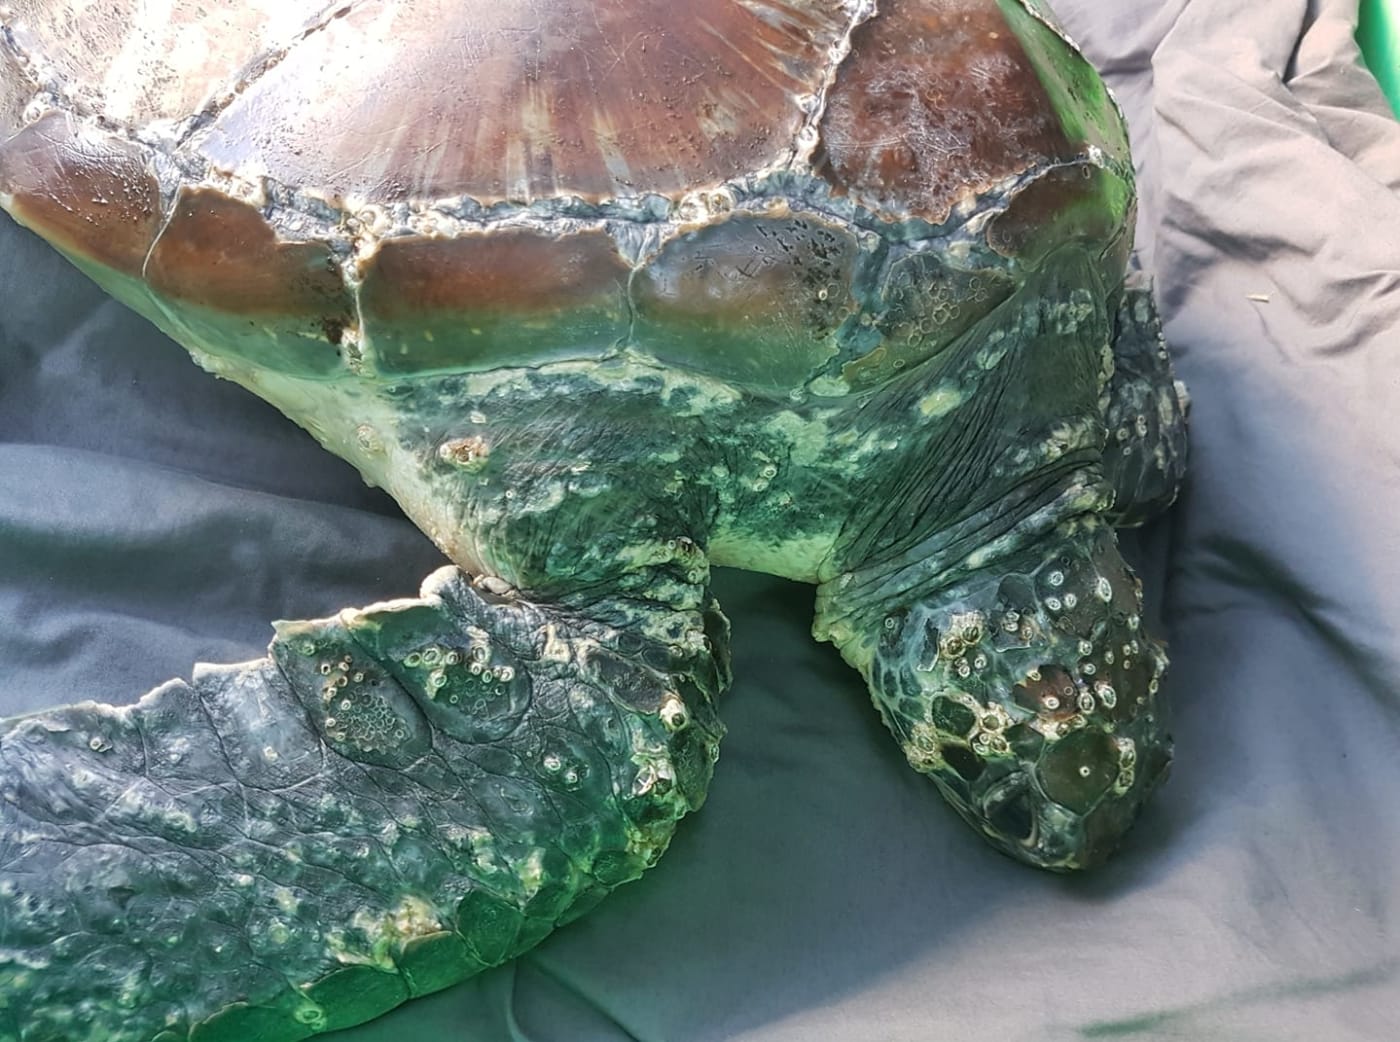 Rescued green sea turtle in care